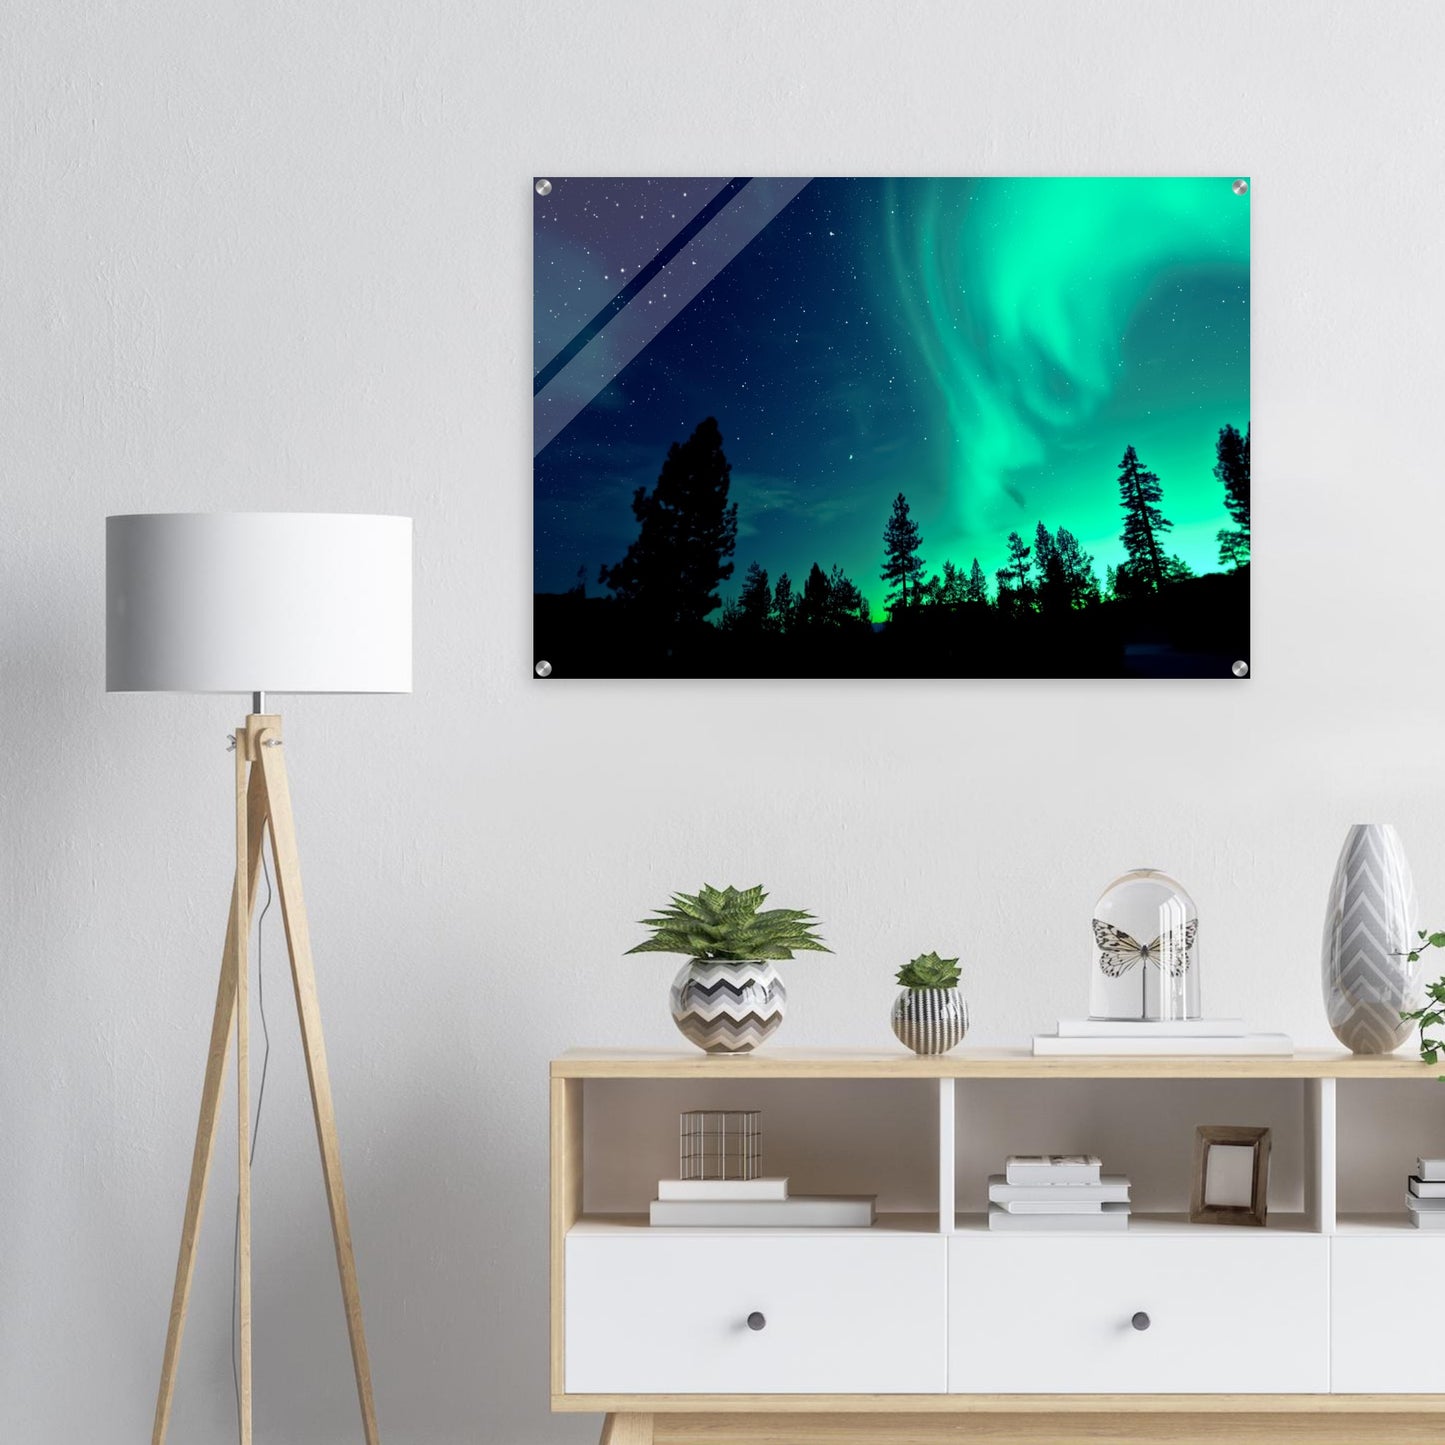 Unique Aurora Borealis Acrylic Prints - Multi Size Personalized Northern Light View - Modern Wall Art - Perfect Aurora Lovers Gift 10